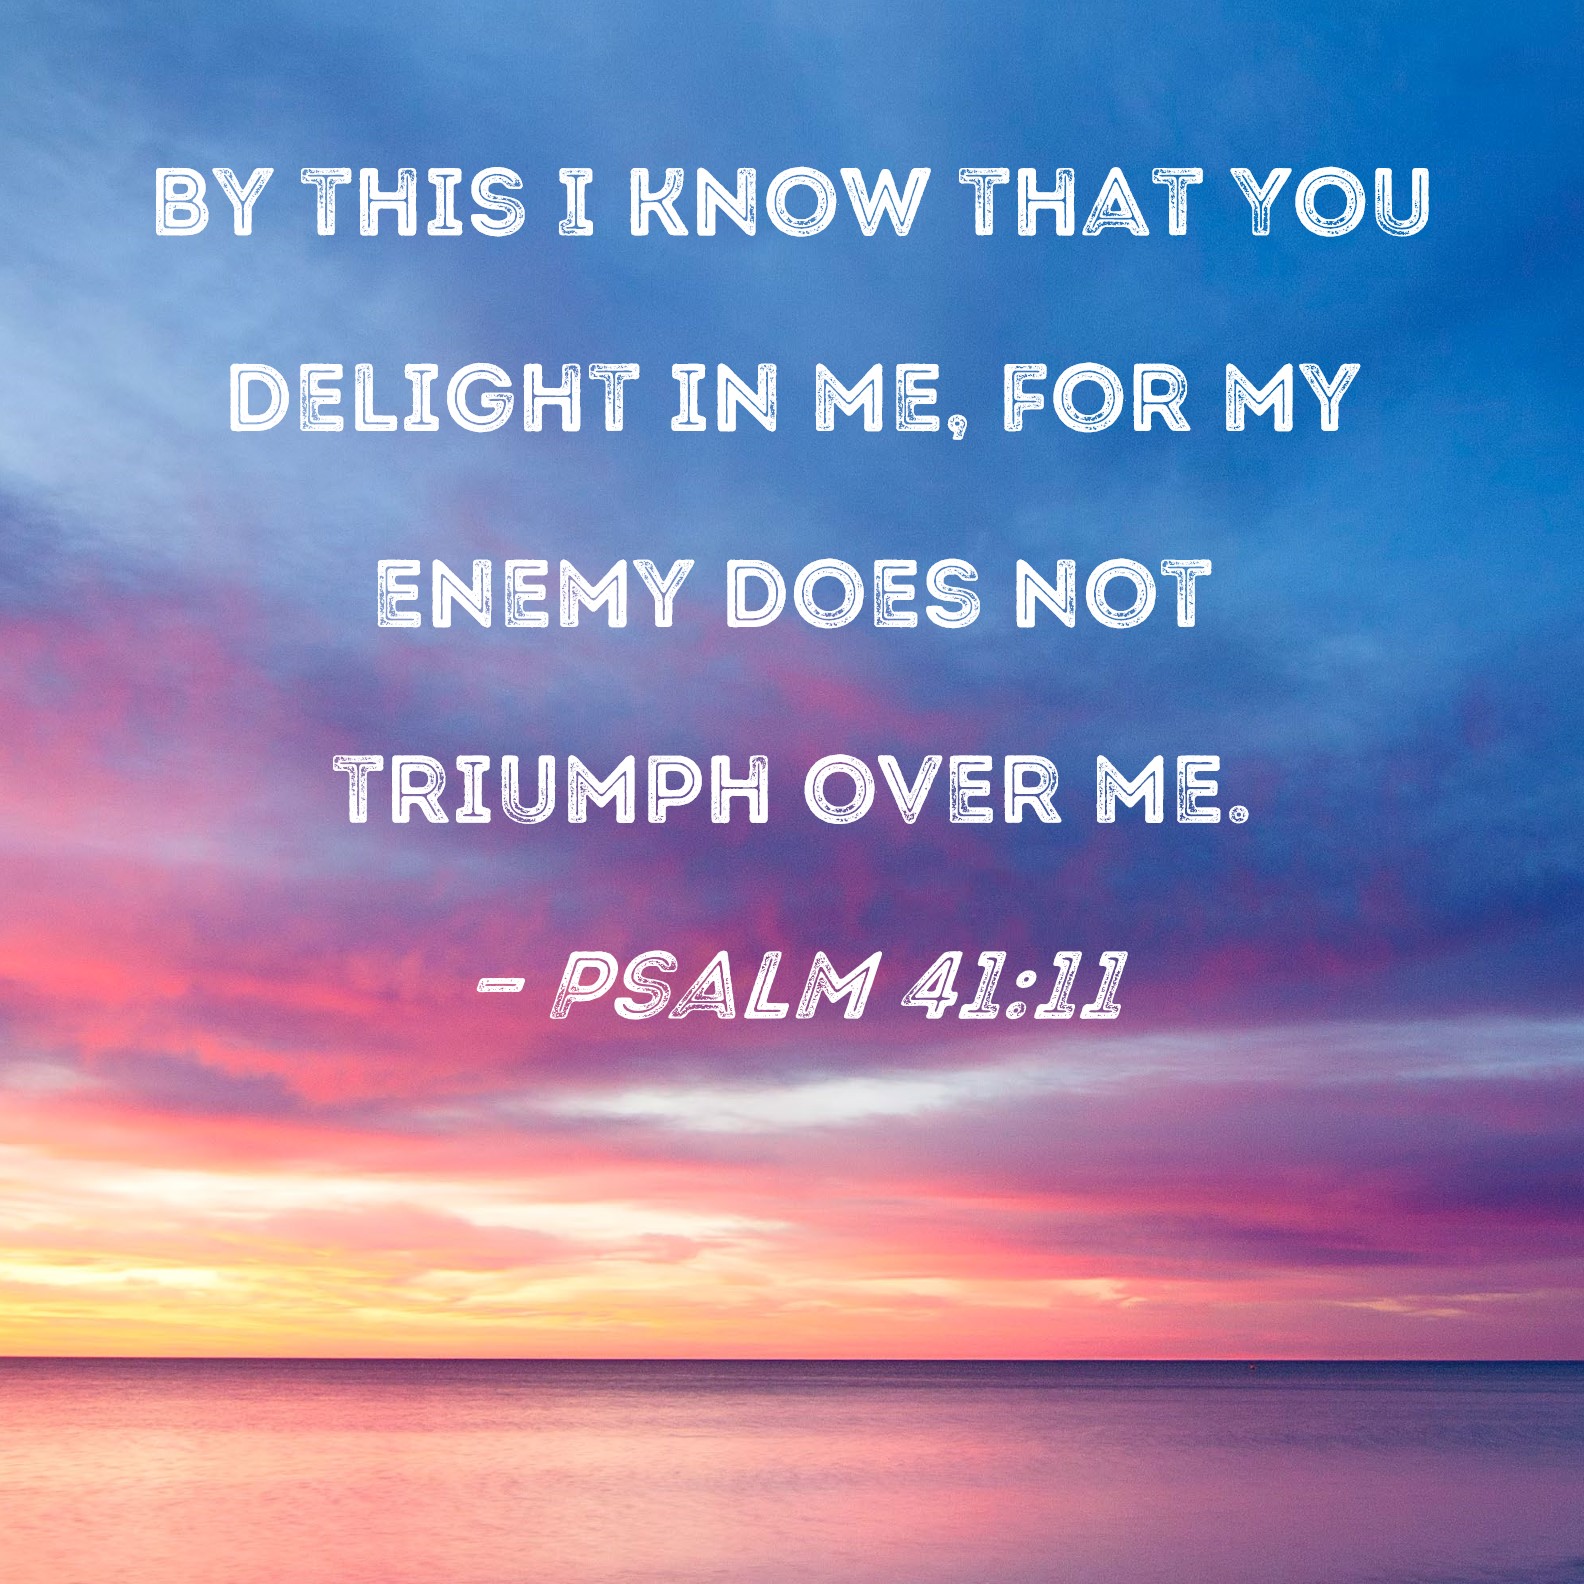 Psalm 41:11 By this I know that You delight in me, for my enemy does ...